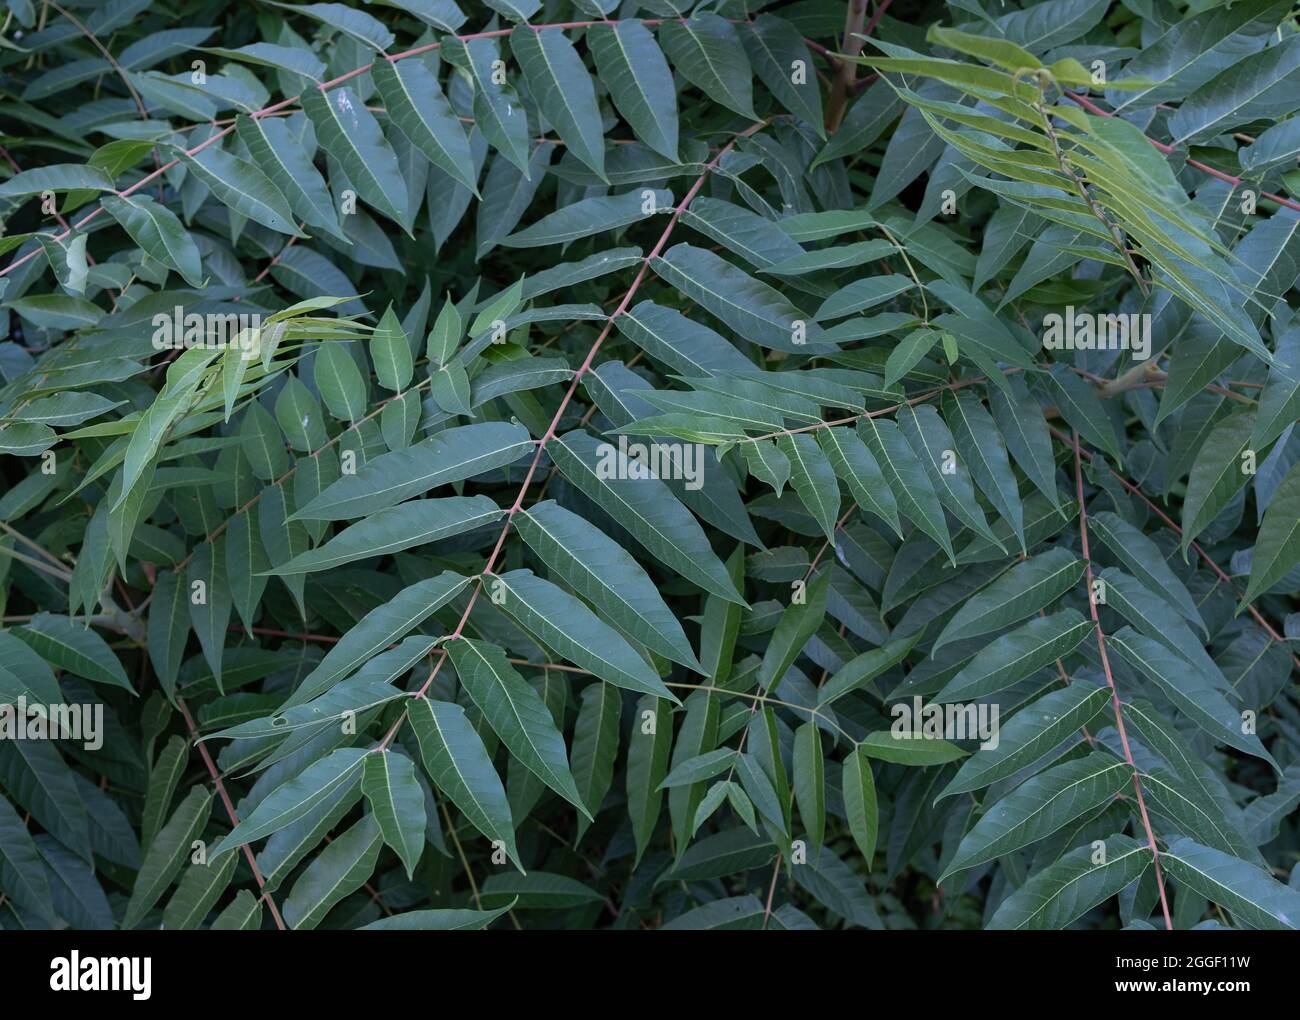 Among branches of Ailanthus altissima or tree of heaven Stock Photo